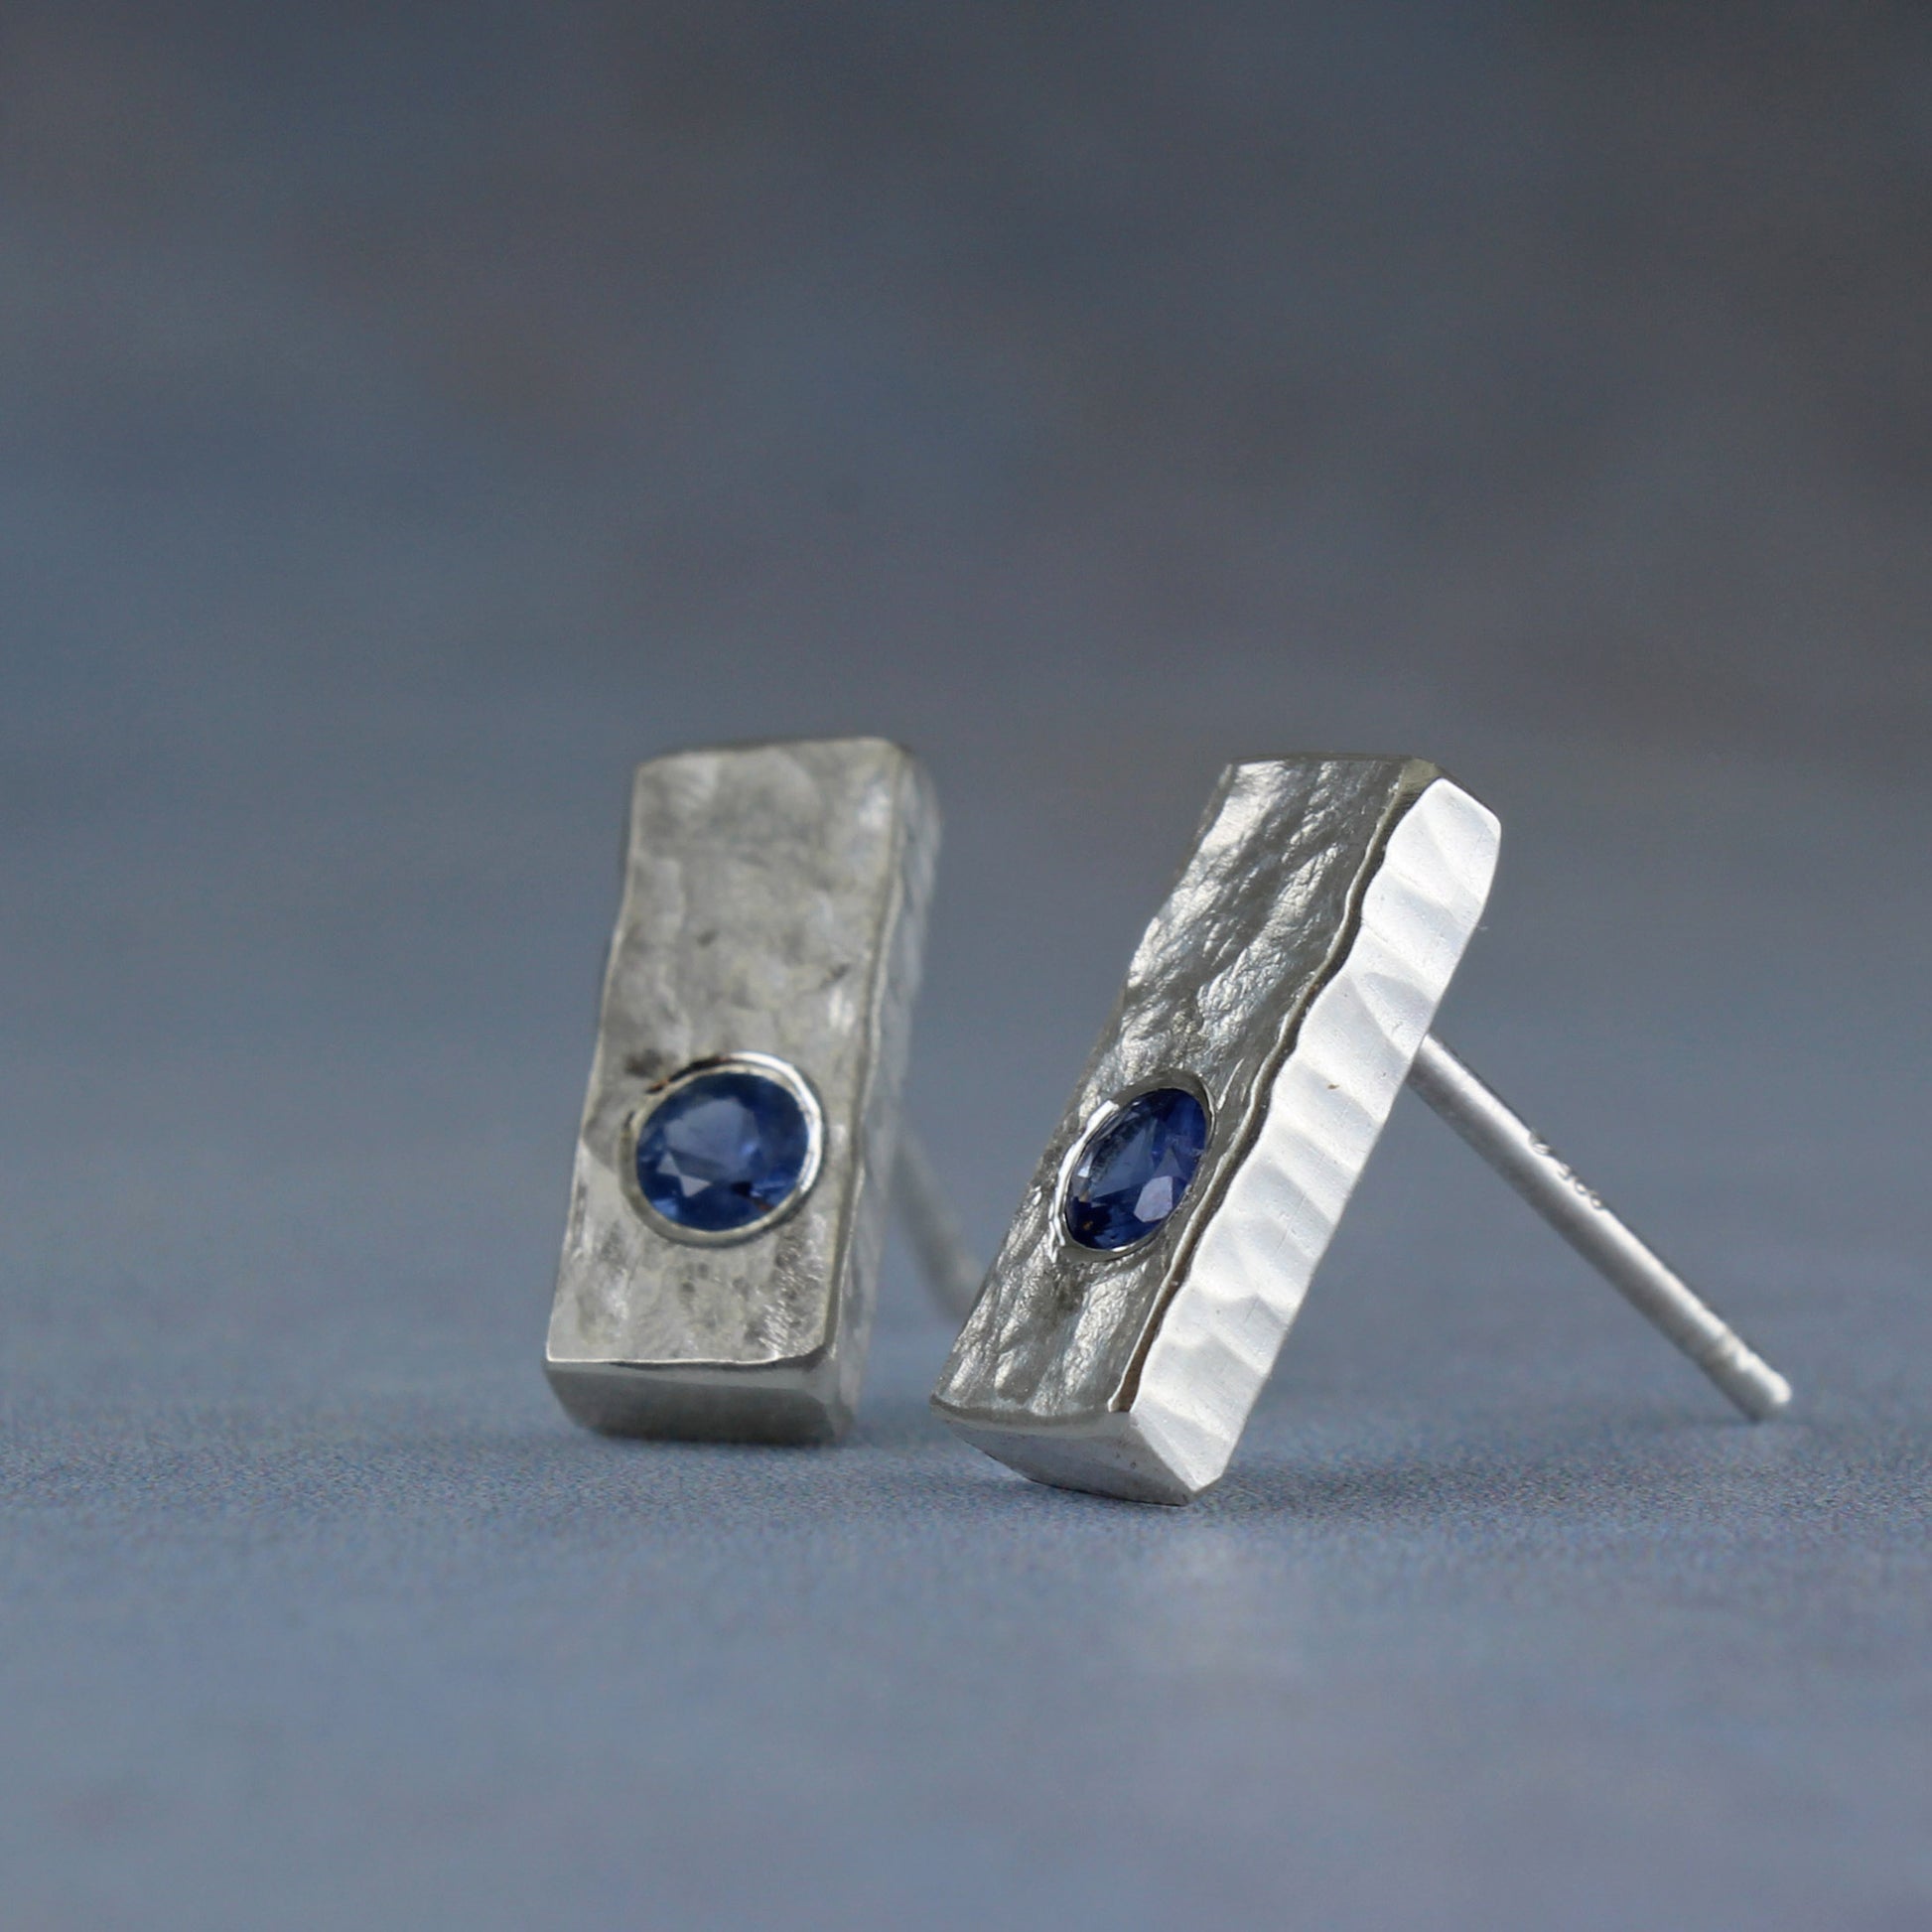 Mens sapphire post earrings, sterling silver bars made from rustic hammered silver